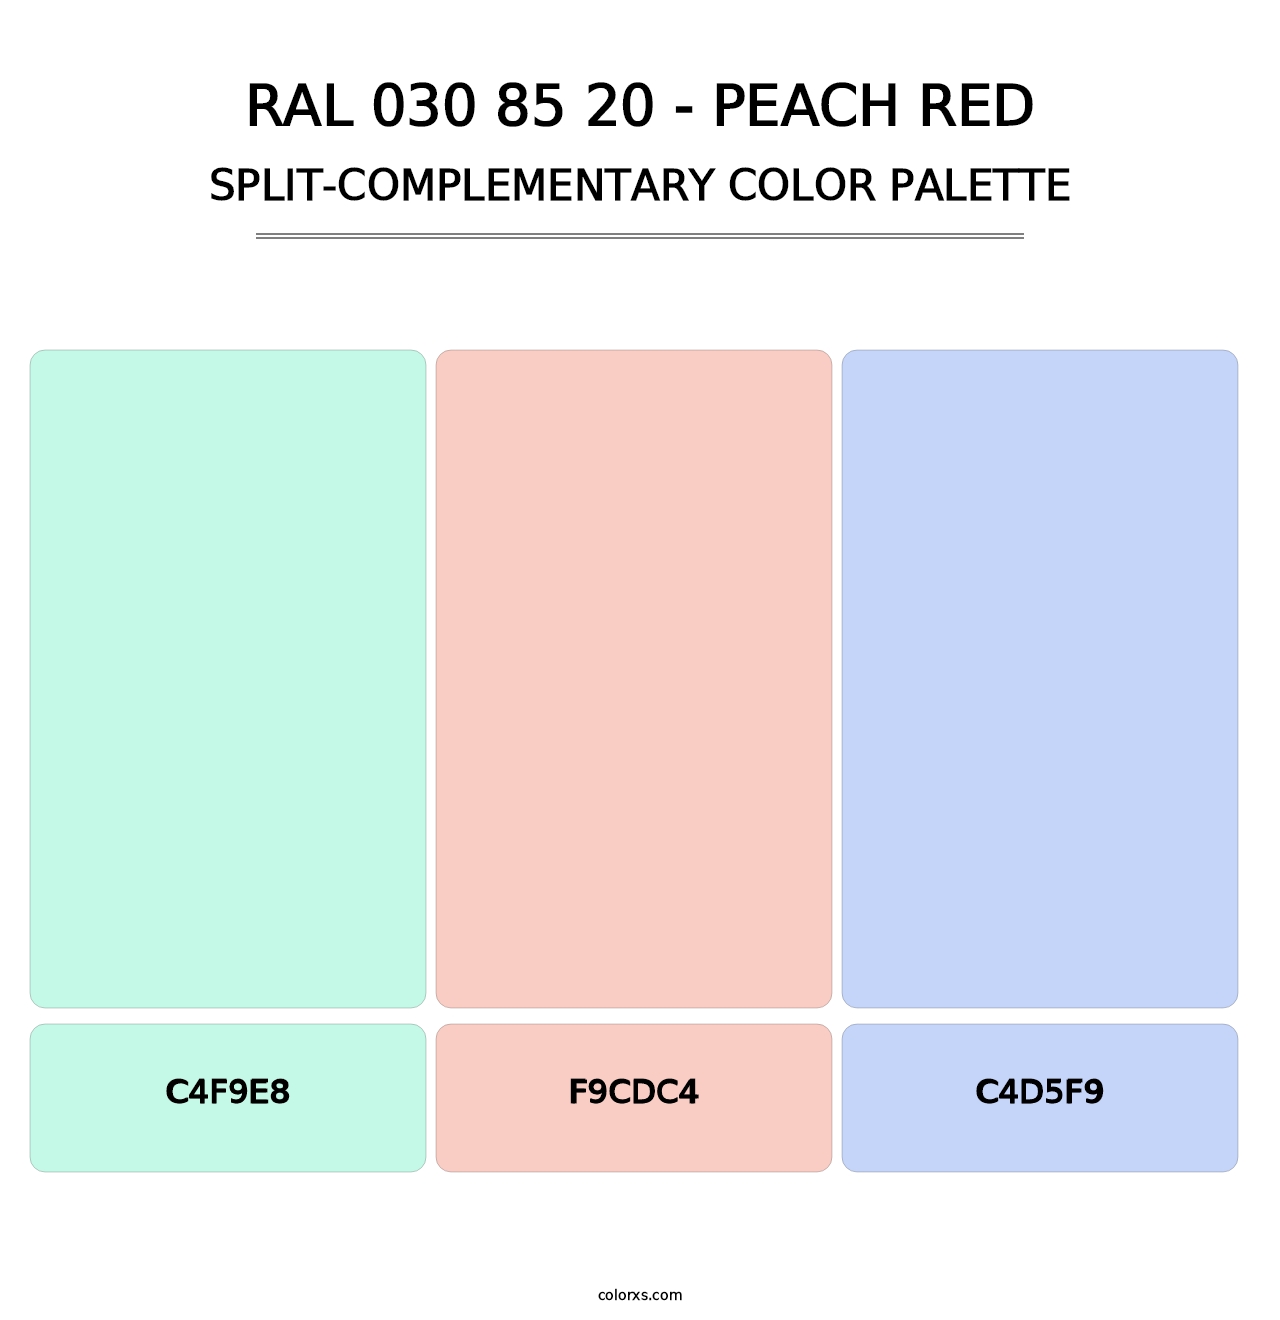 RAL 030 85 20 - Peach Red - Split-Complementary Color Palette